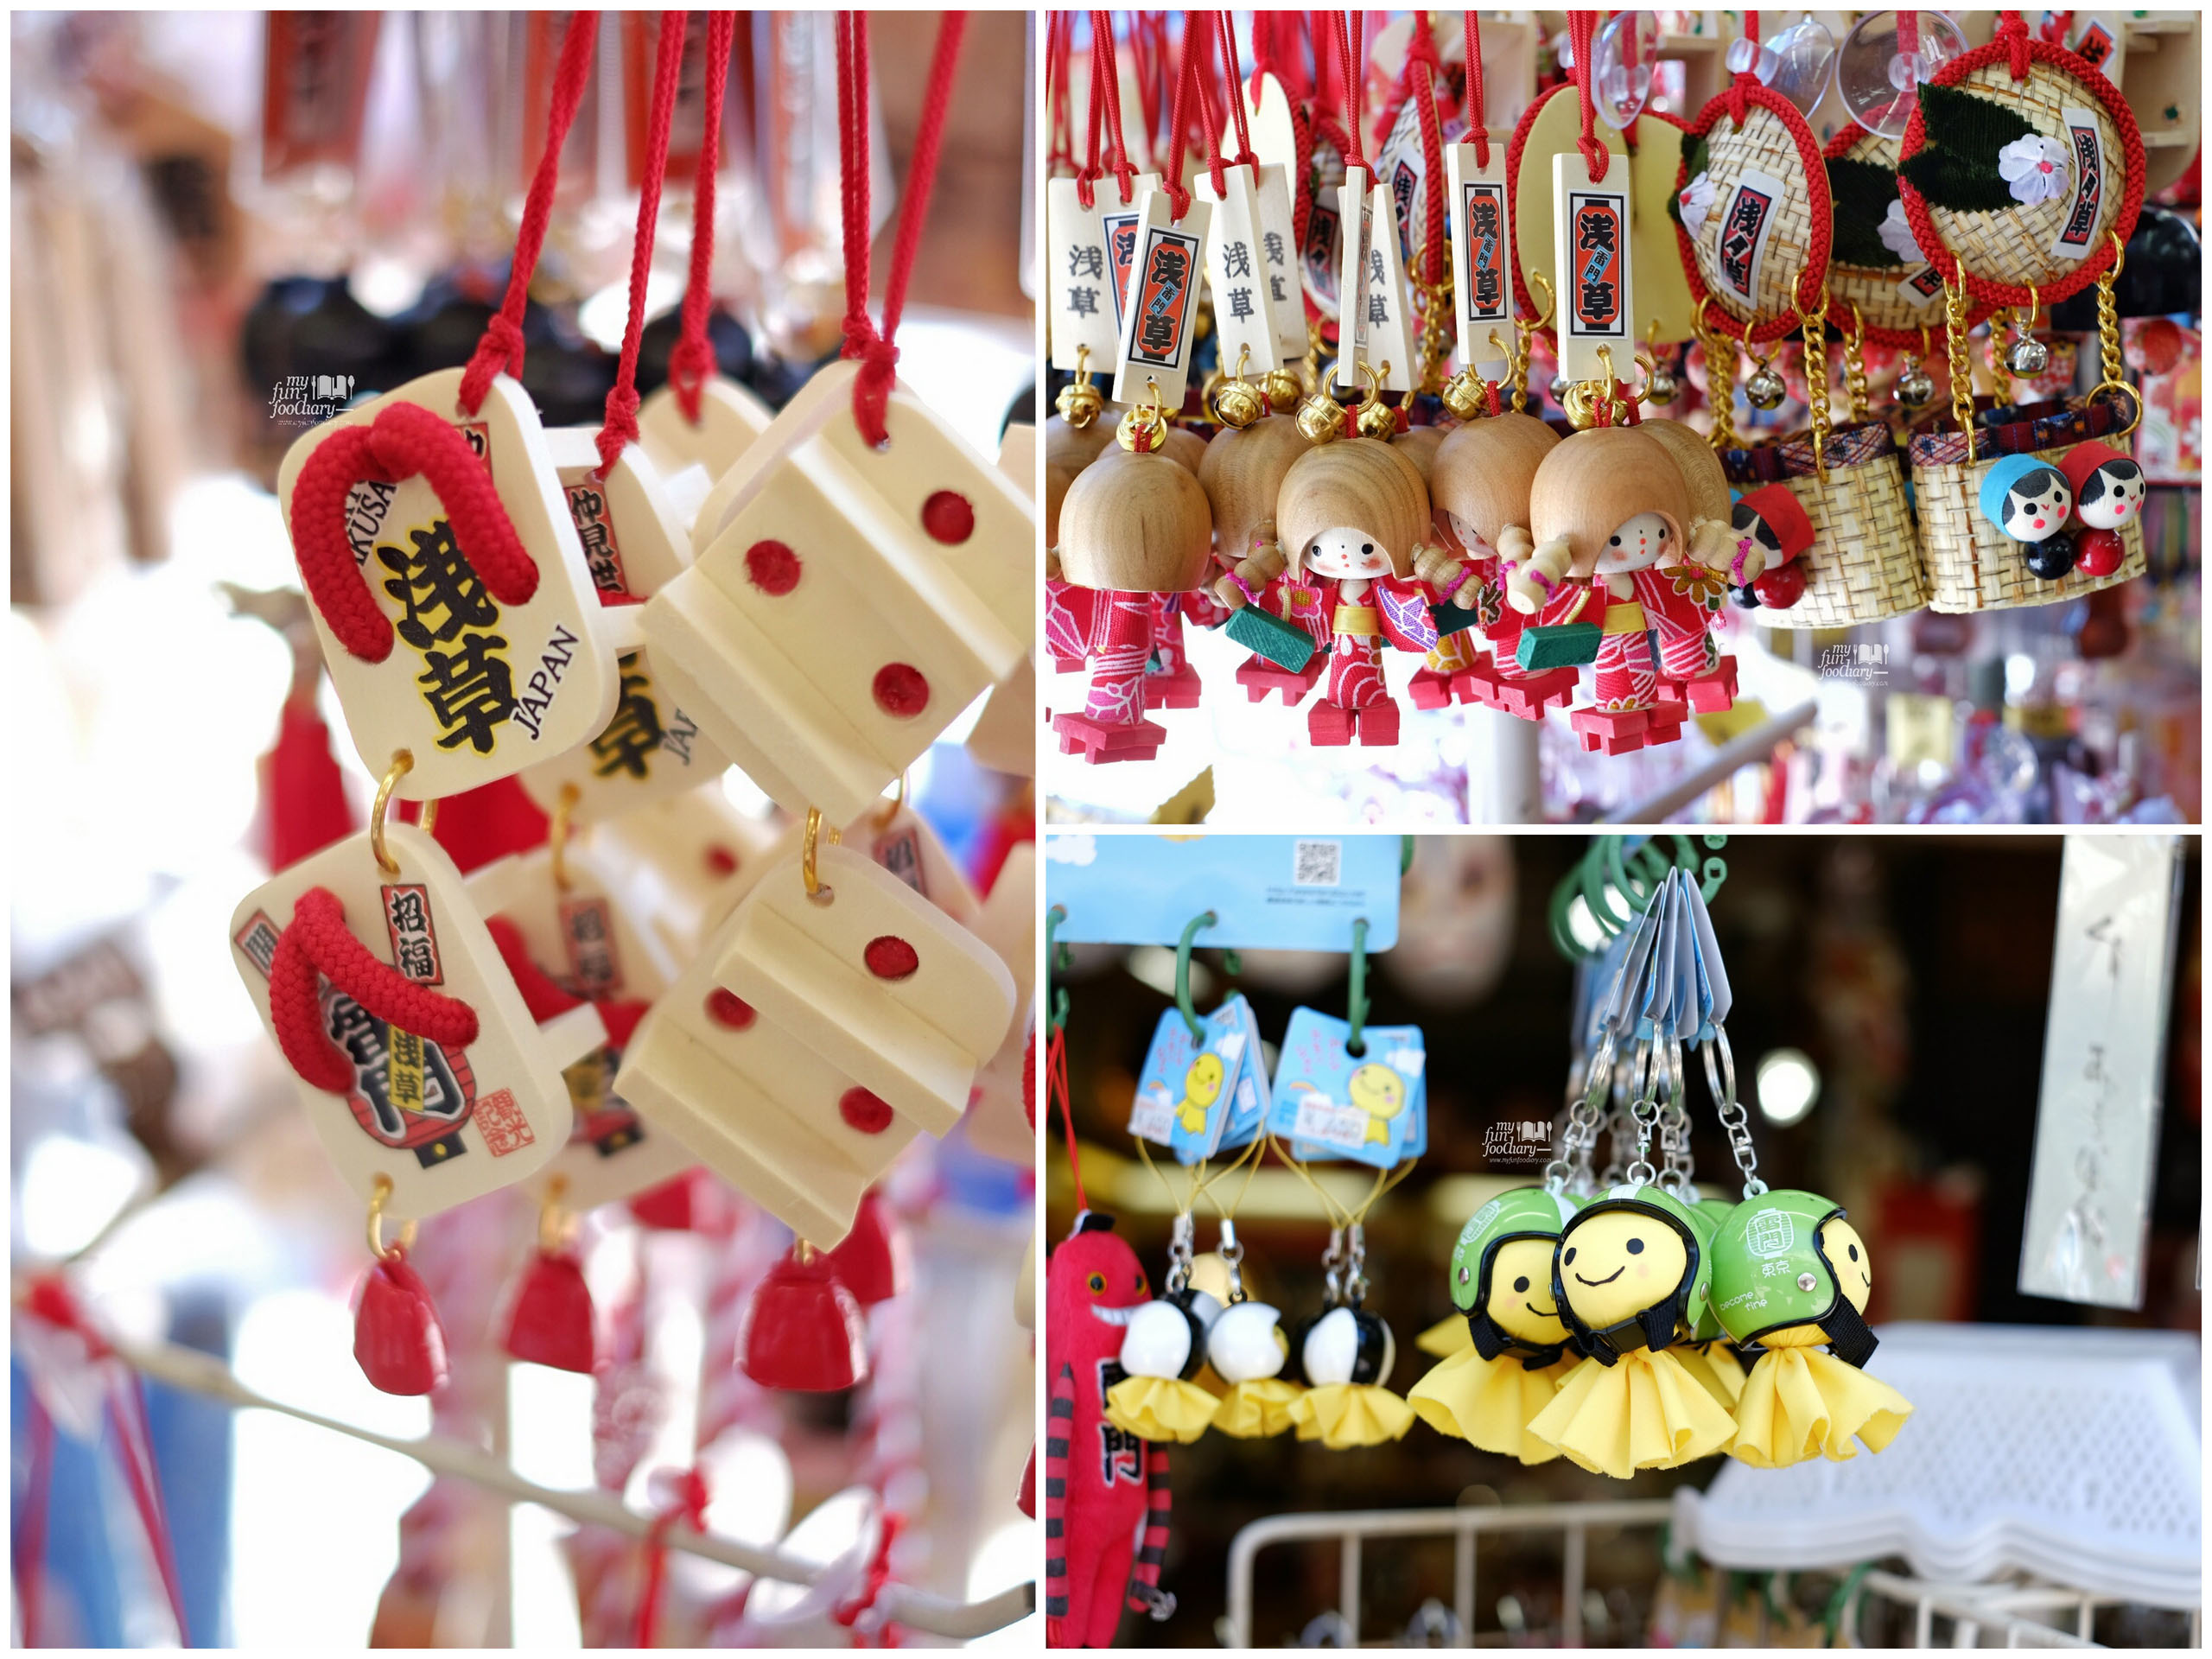 Keychains for souvenirs at Nakamise Shopping Street - Asakusa Tokyo by Myfunfoodiary